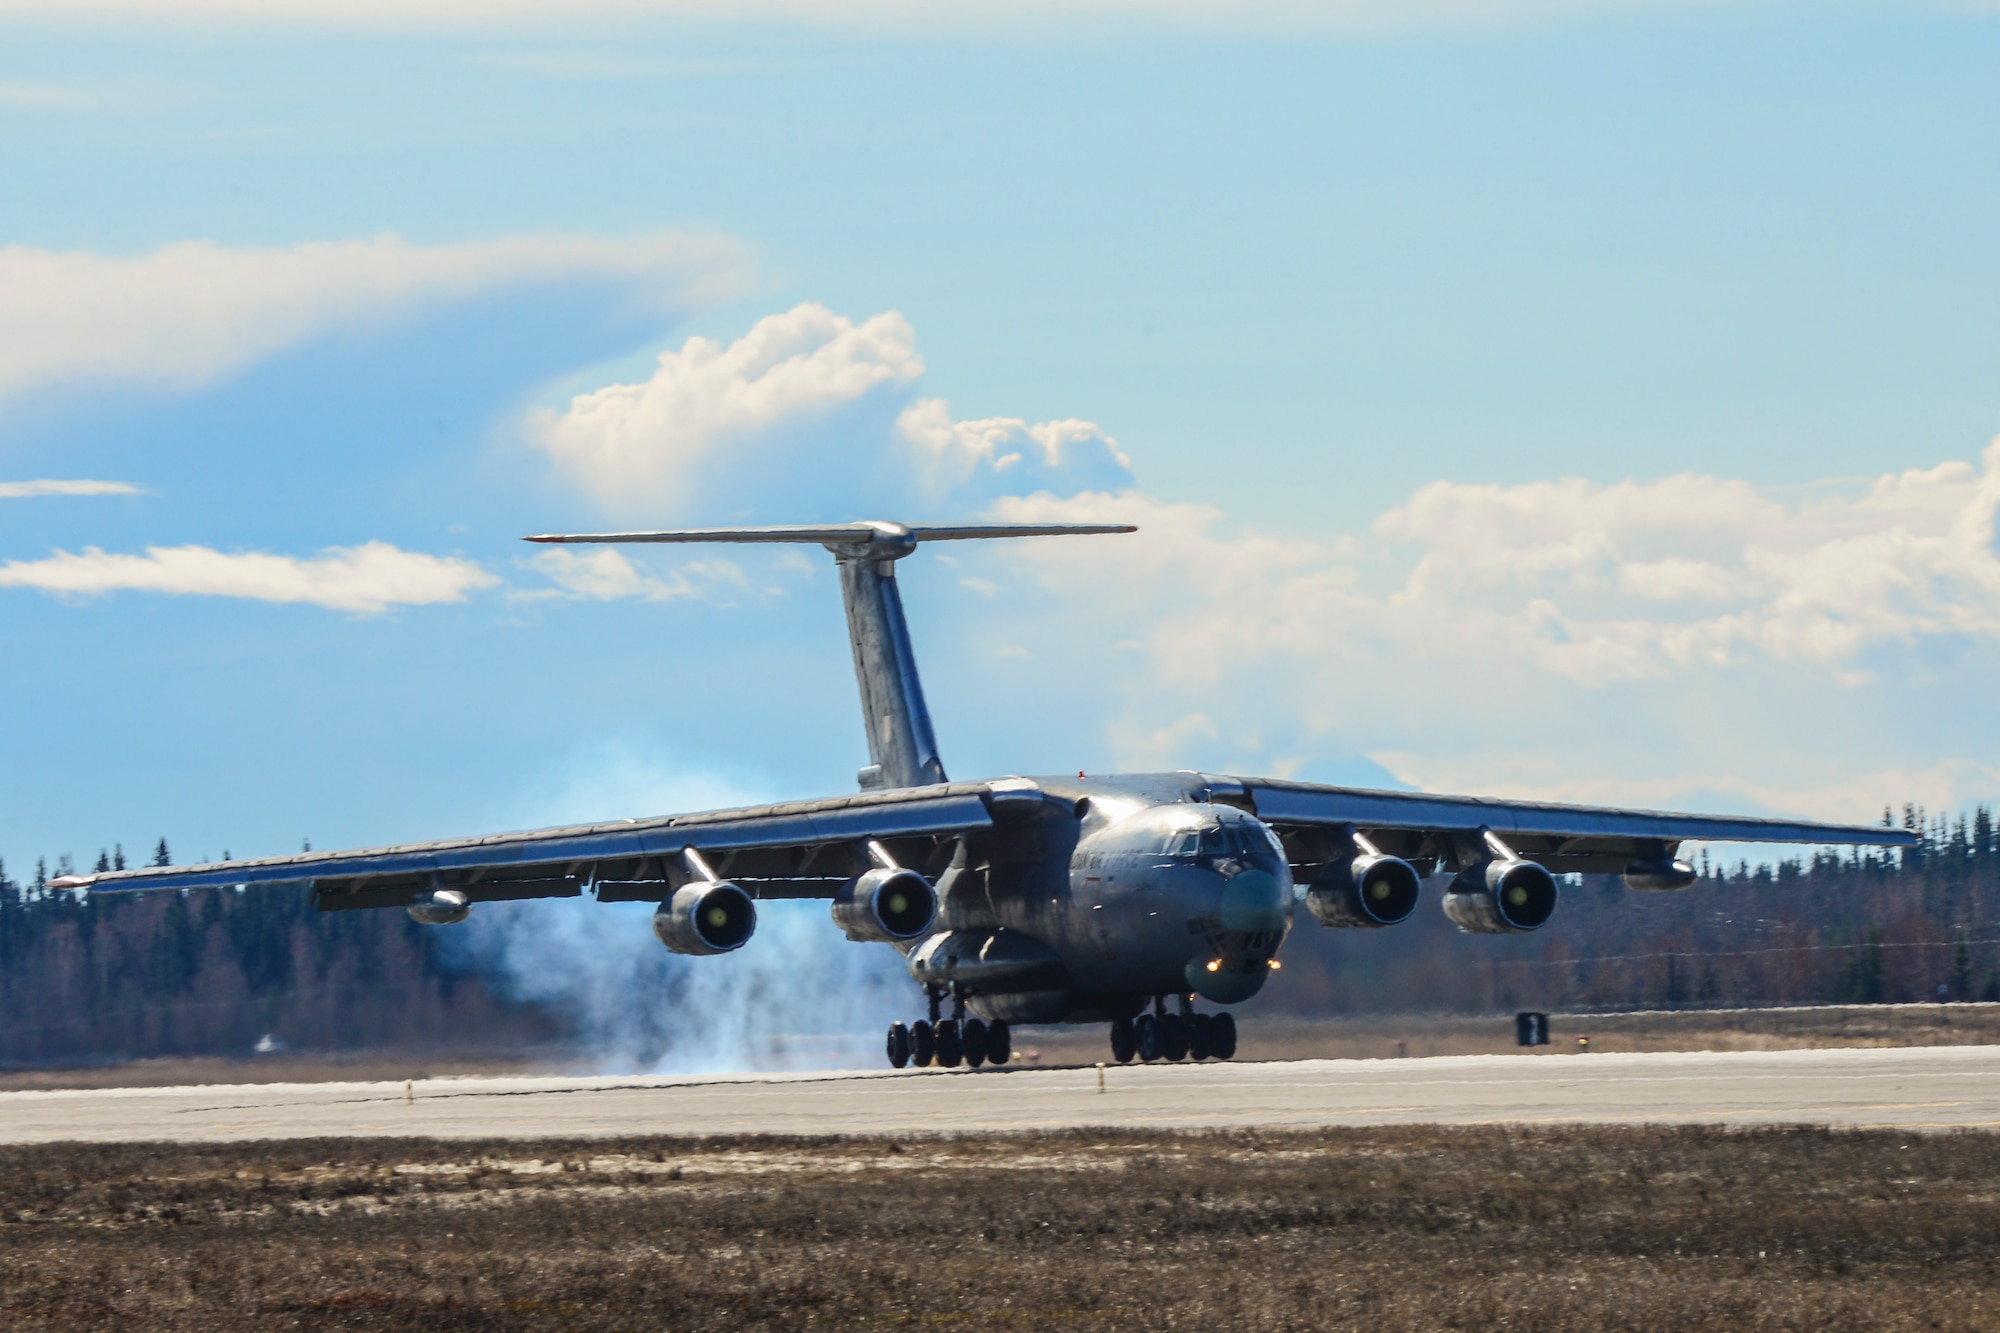 An Indian Air Force IL-78MKI aerial refueling aircraft lands at Eielson Air Force Base, Alaska, April 16, 2016. Indian Air Force airmen arrived at Eielson in preparation for RED FLAG-Alaska 16-1. RF-A is a series of Pacific Air Forces commander-directed field training exercises for U.S. and partner nation forces, providing combined offensive counter-air, interdiction, close air support and large force employment training in a simulated combat environment. (U.S. Air Force photo by Staff Sgt. Joshua Turner/Released)